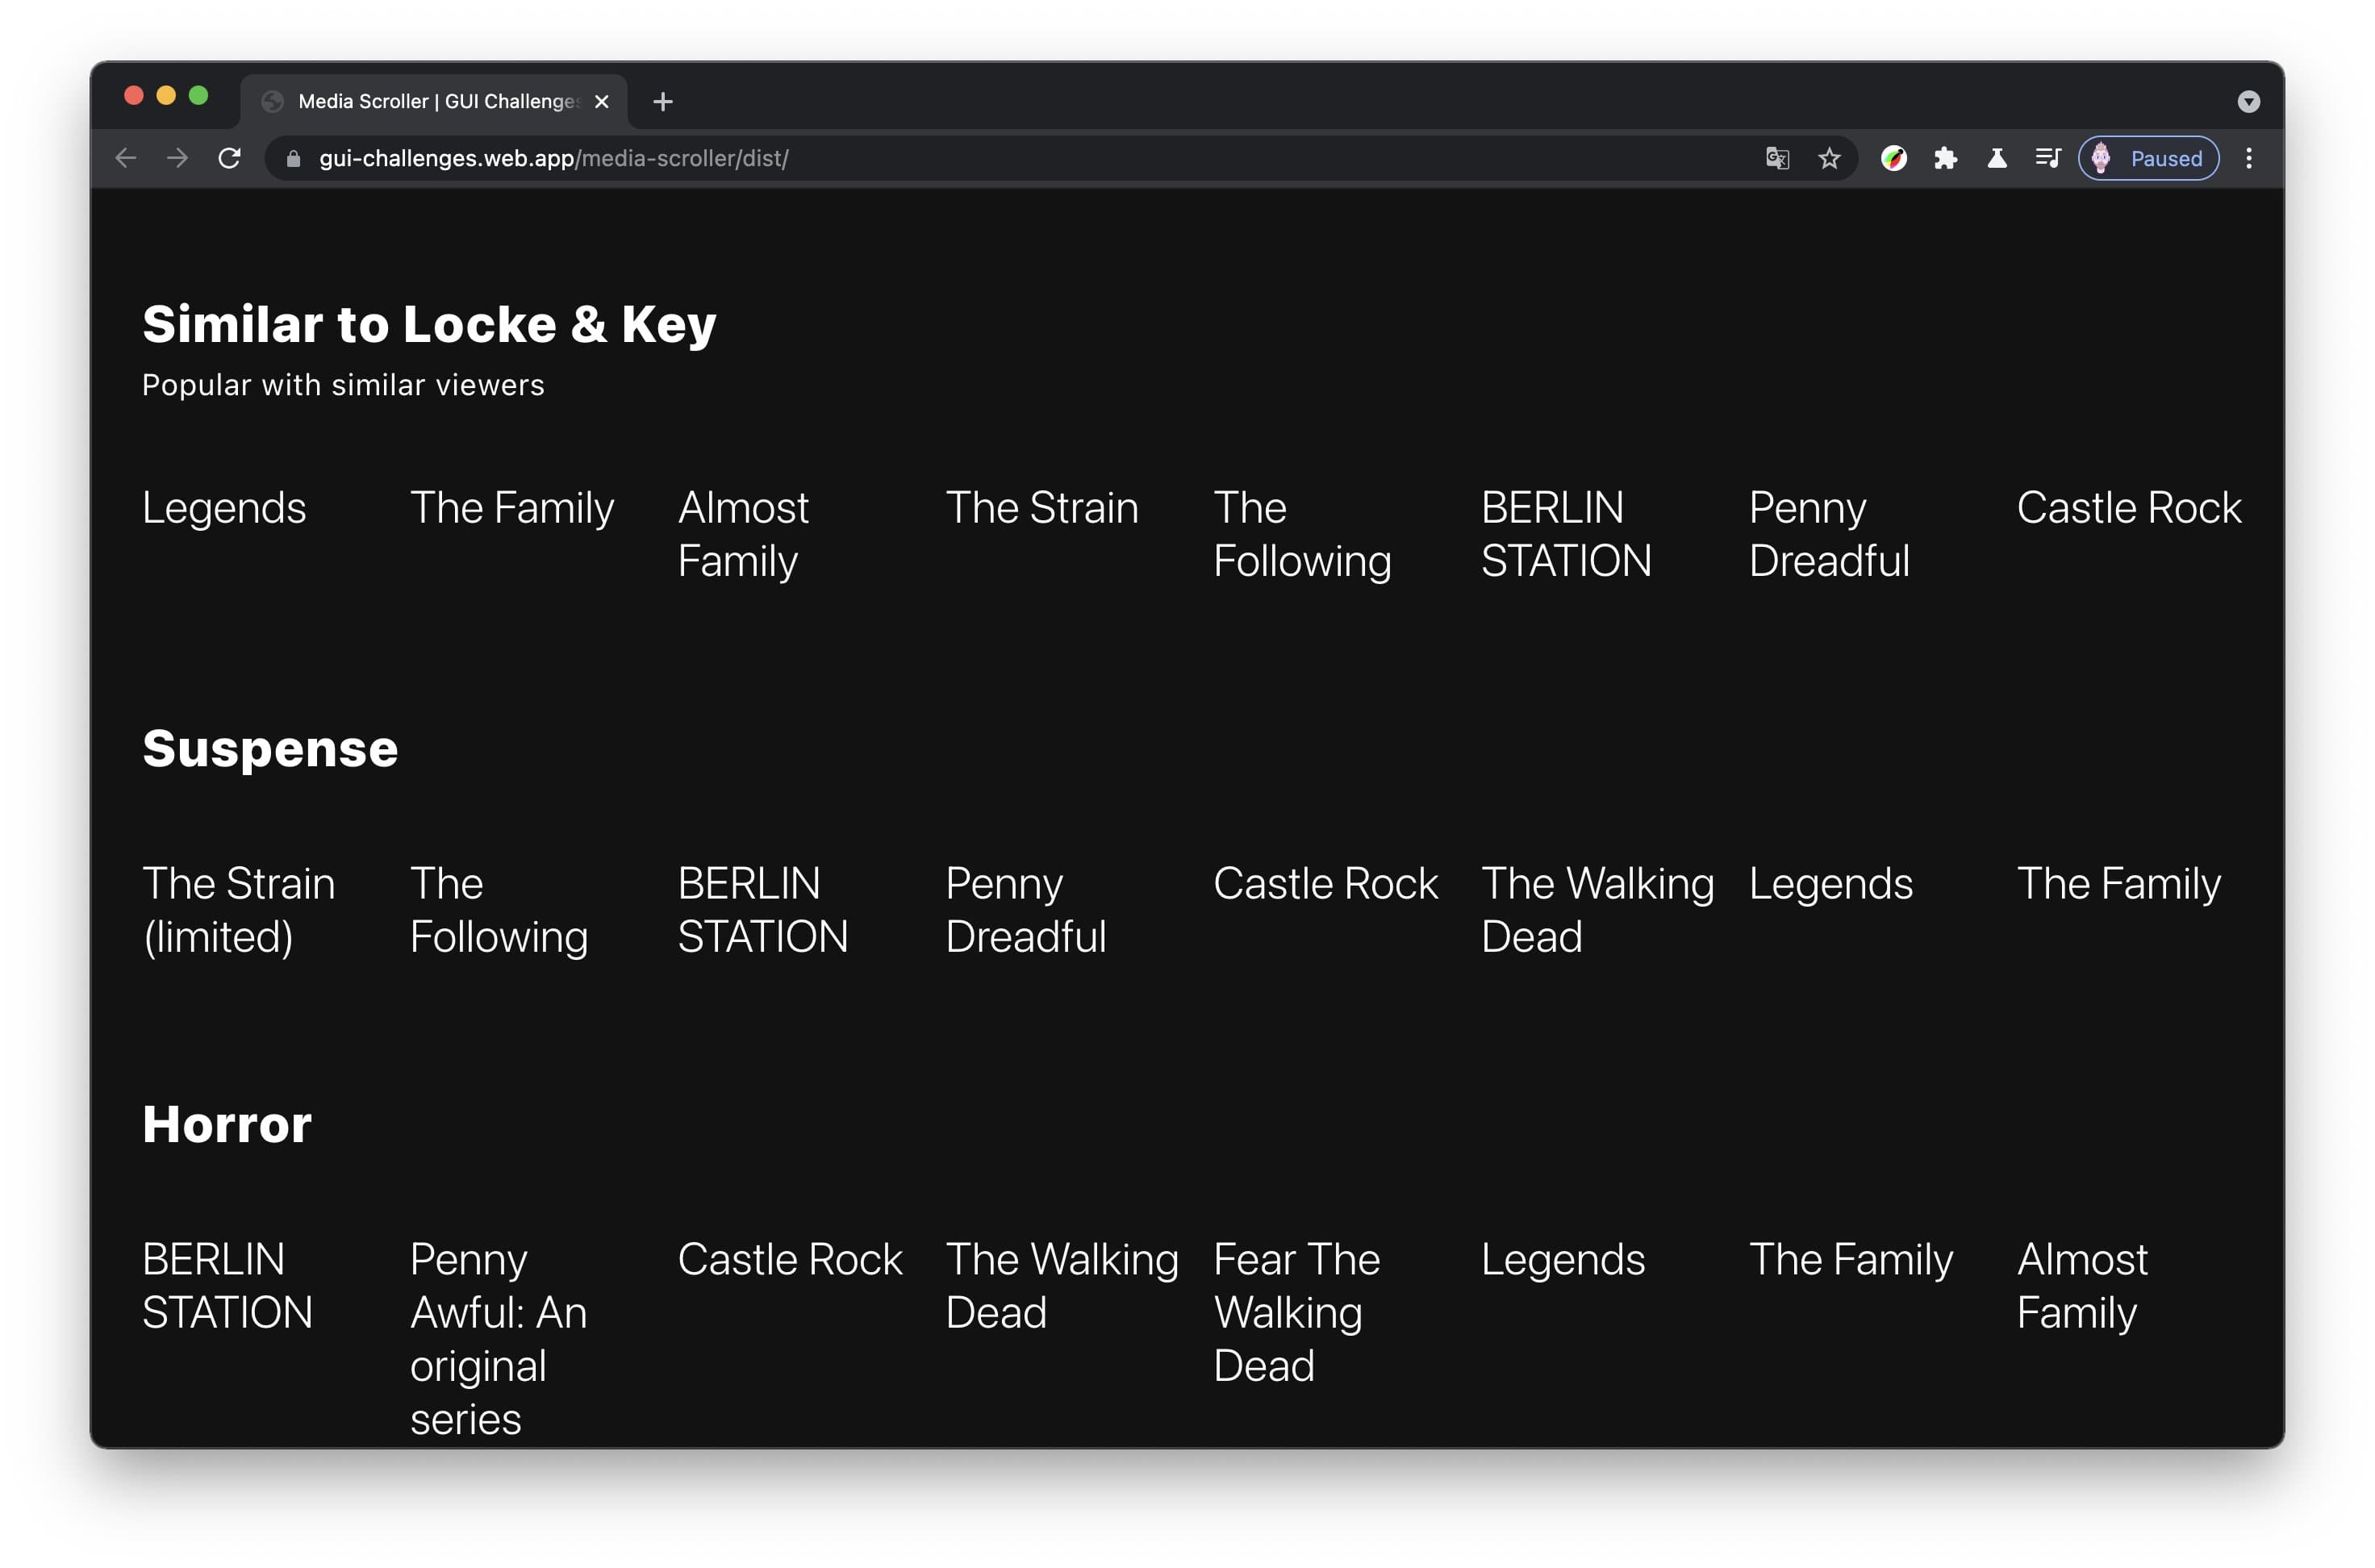 Screenshot of a TV show carousel interface with no thumbnails and many titles shown.